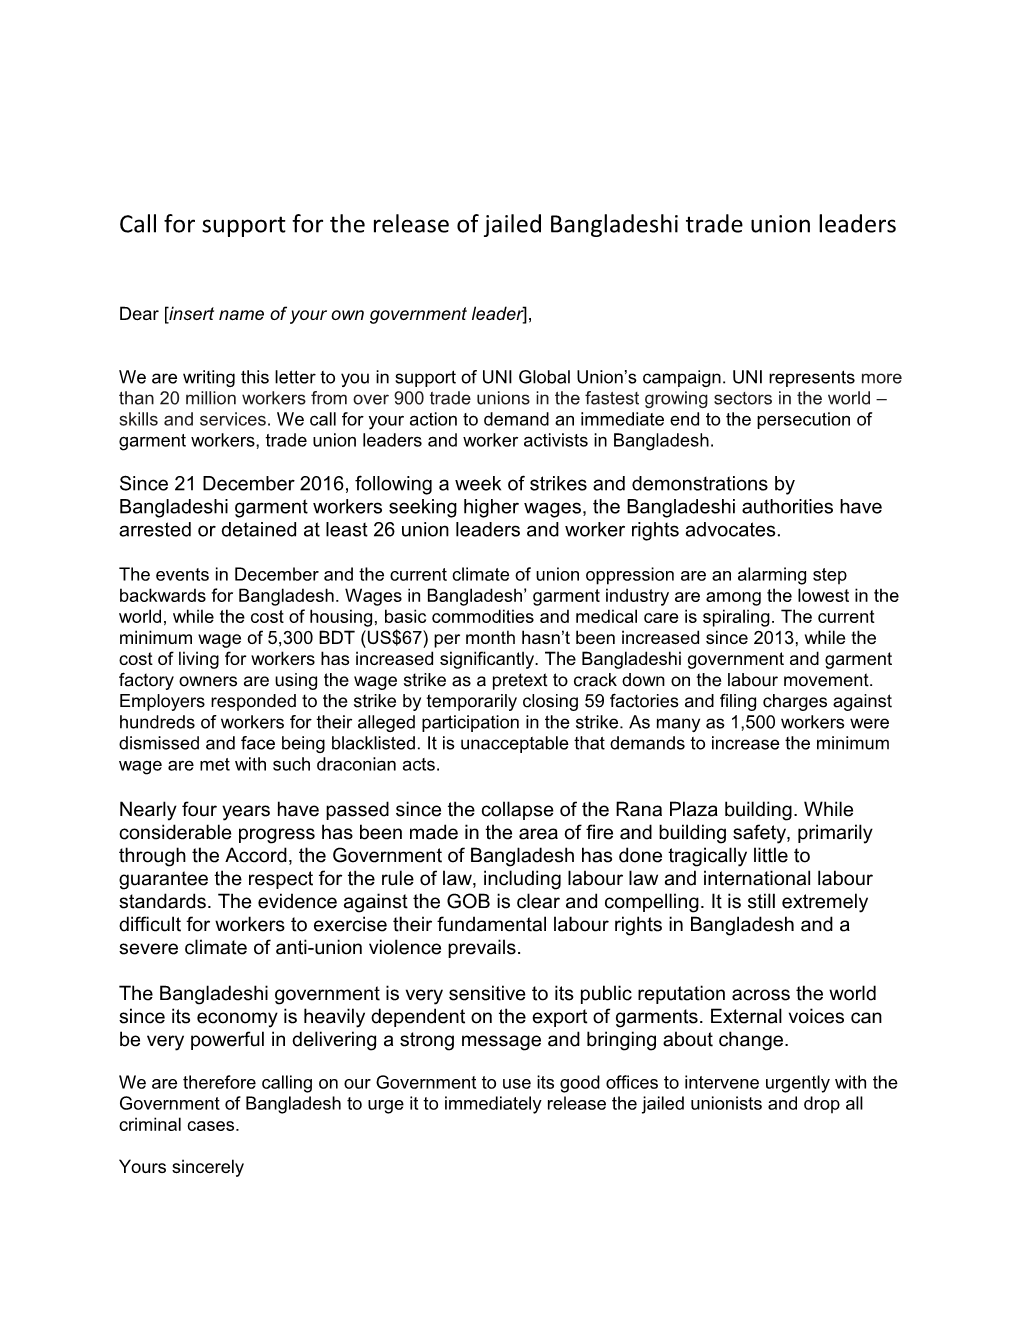 Call for Support for the Release of Jailed Bangladeshi Trade Union Leaders